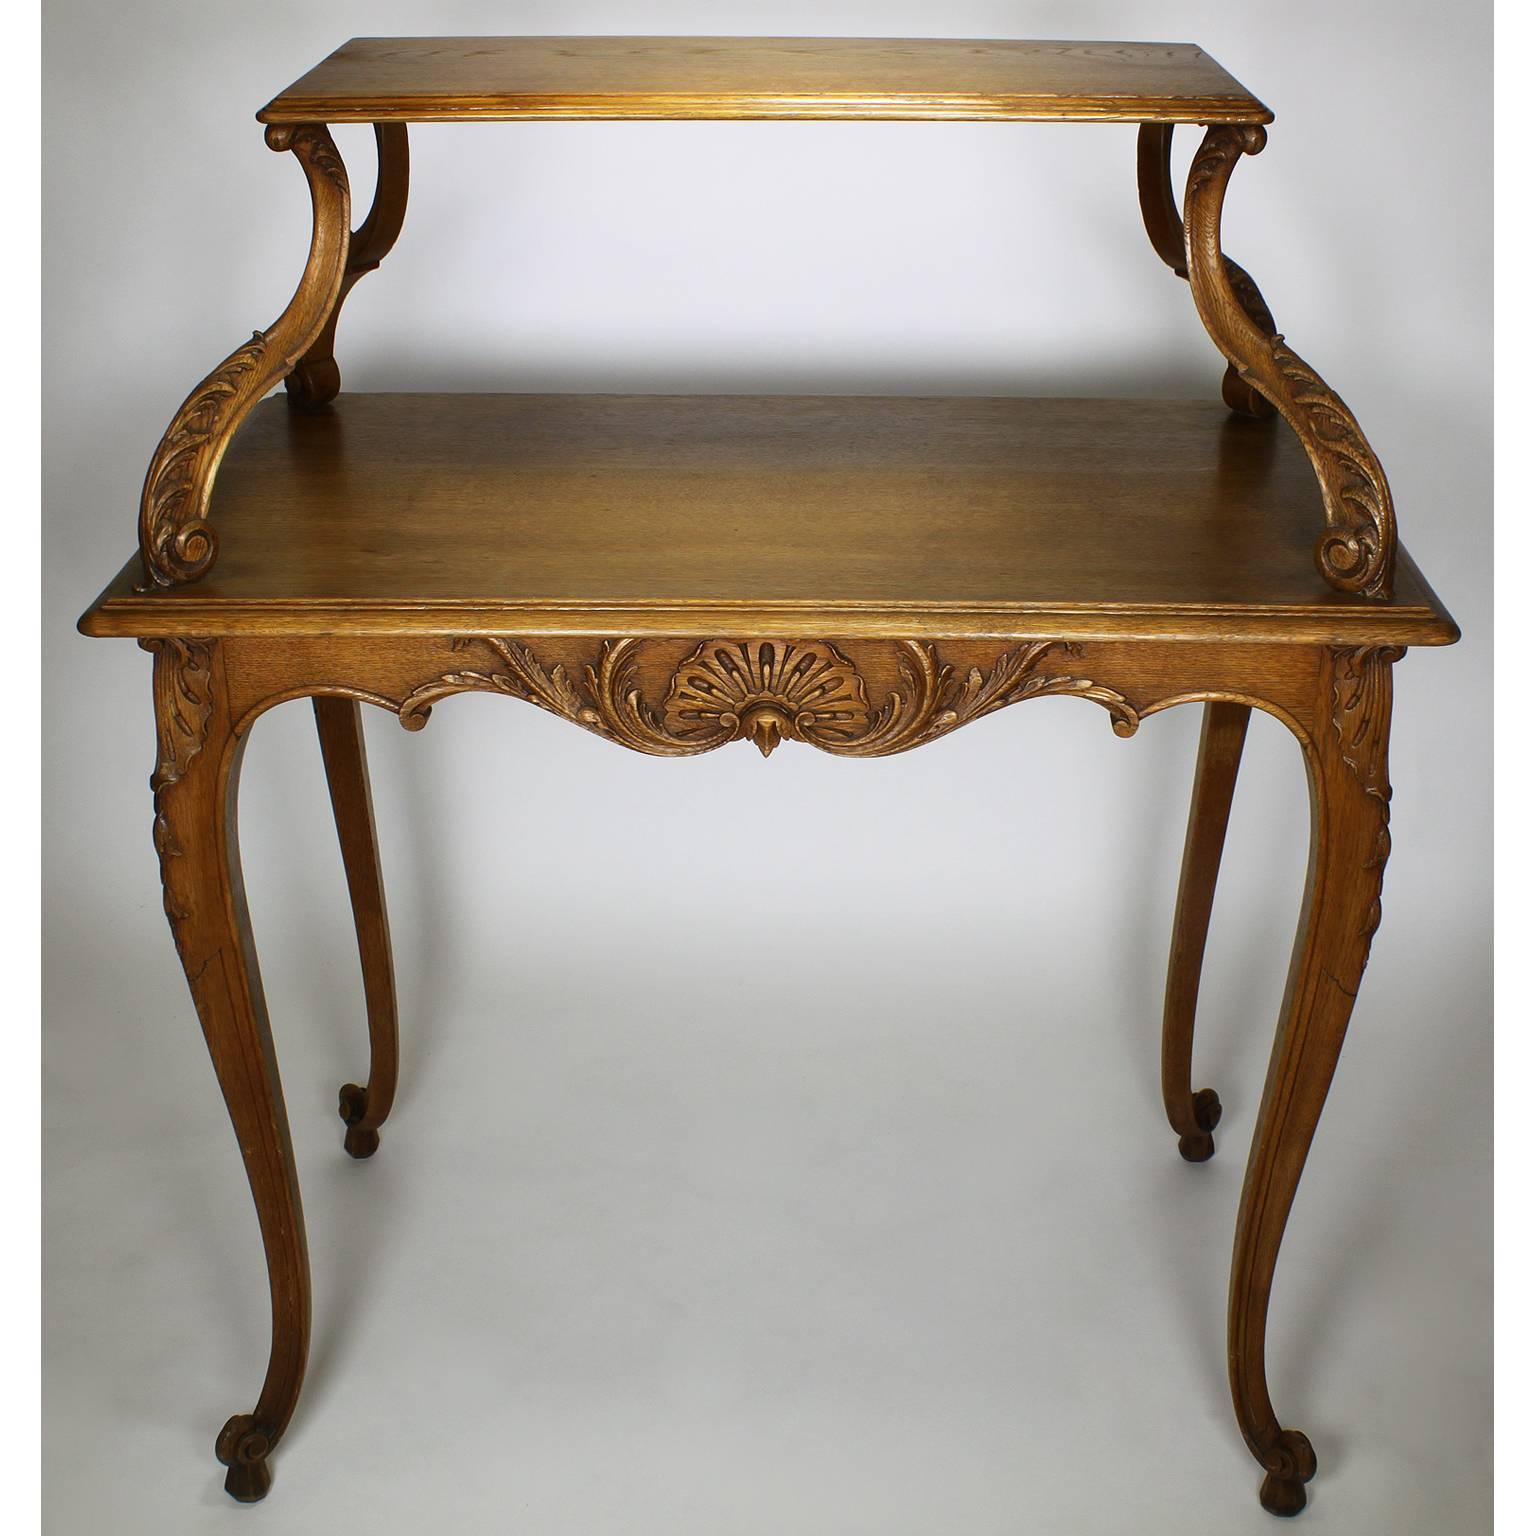 A French 19th-20th century Louis XV Style carved oak two-tier tea or dessert table. The tall and slender body with carved seashells on the apron, an upper shelf raised on four scrolled supports, all raised on four cabriolet legs with scrolled